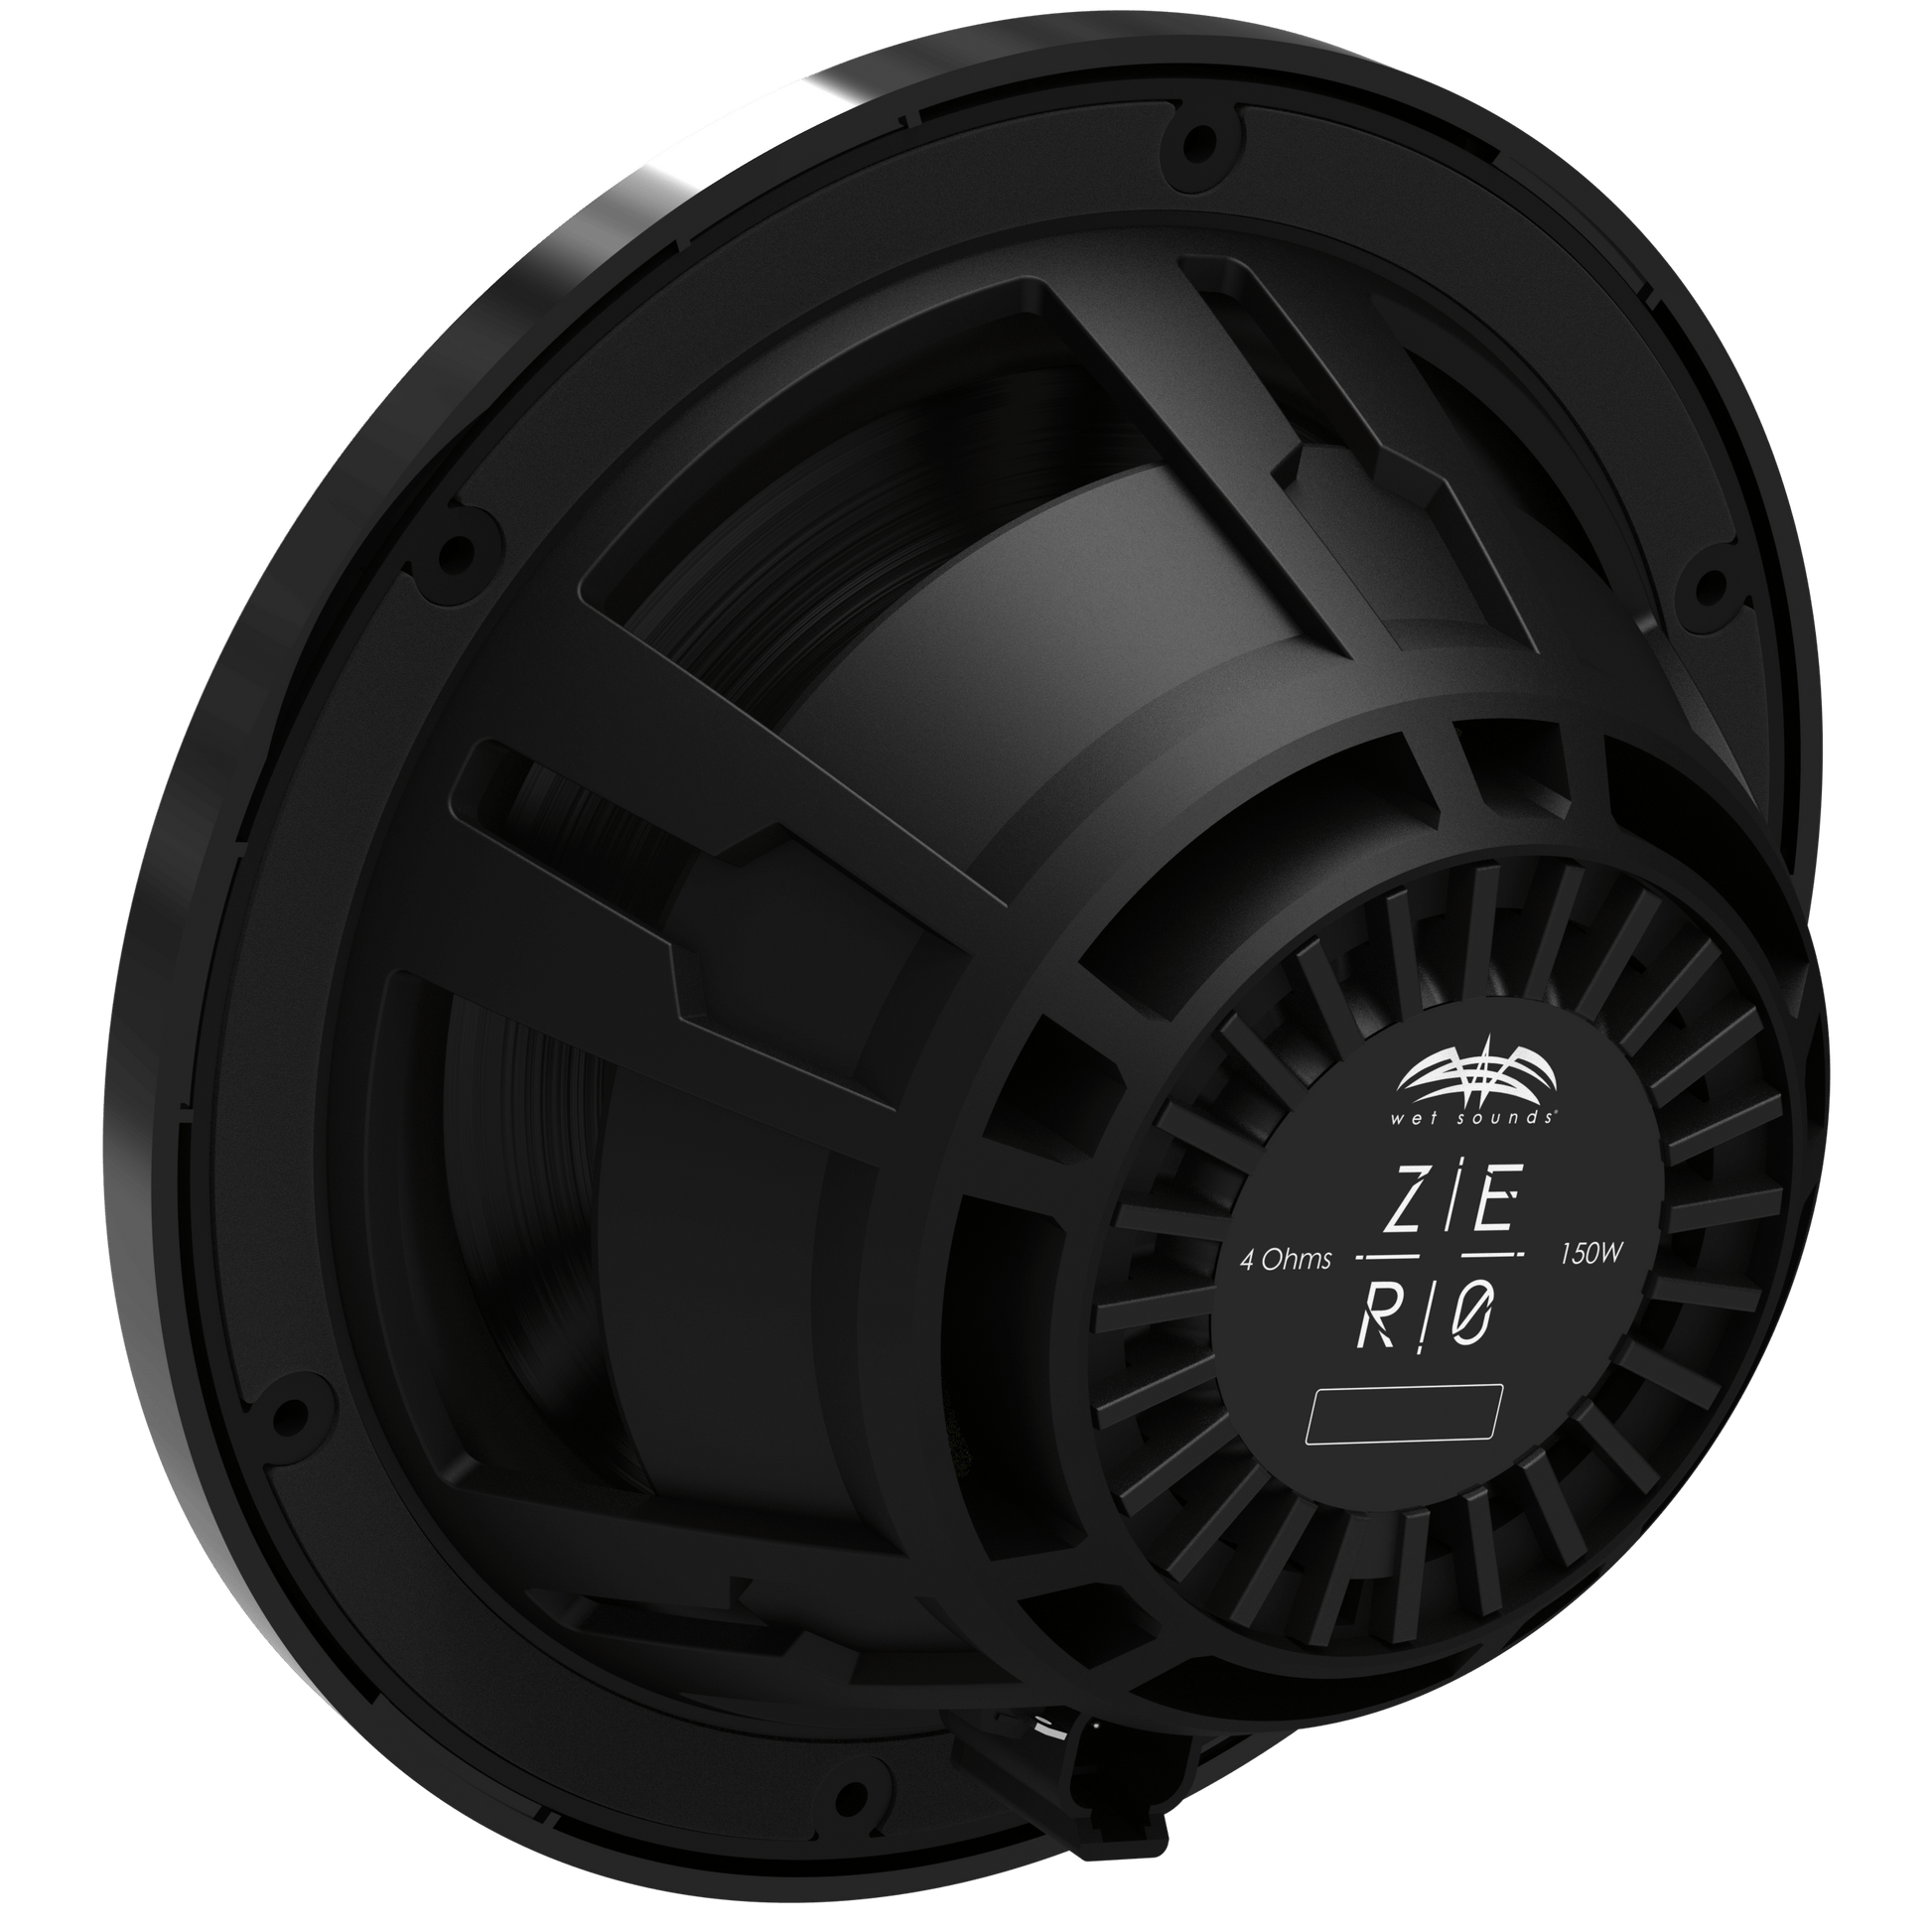 Wet Sounds Boat Boat Coax Speakers Wet Sounds Zero 8 XZ-B | Wet Sounds High-Output 8" Marine Coaxial Speakers